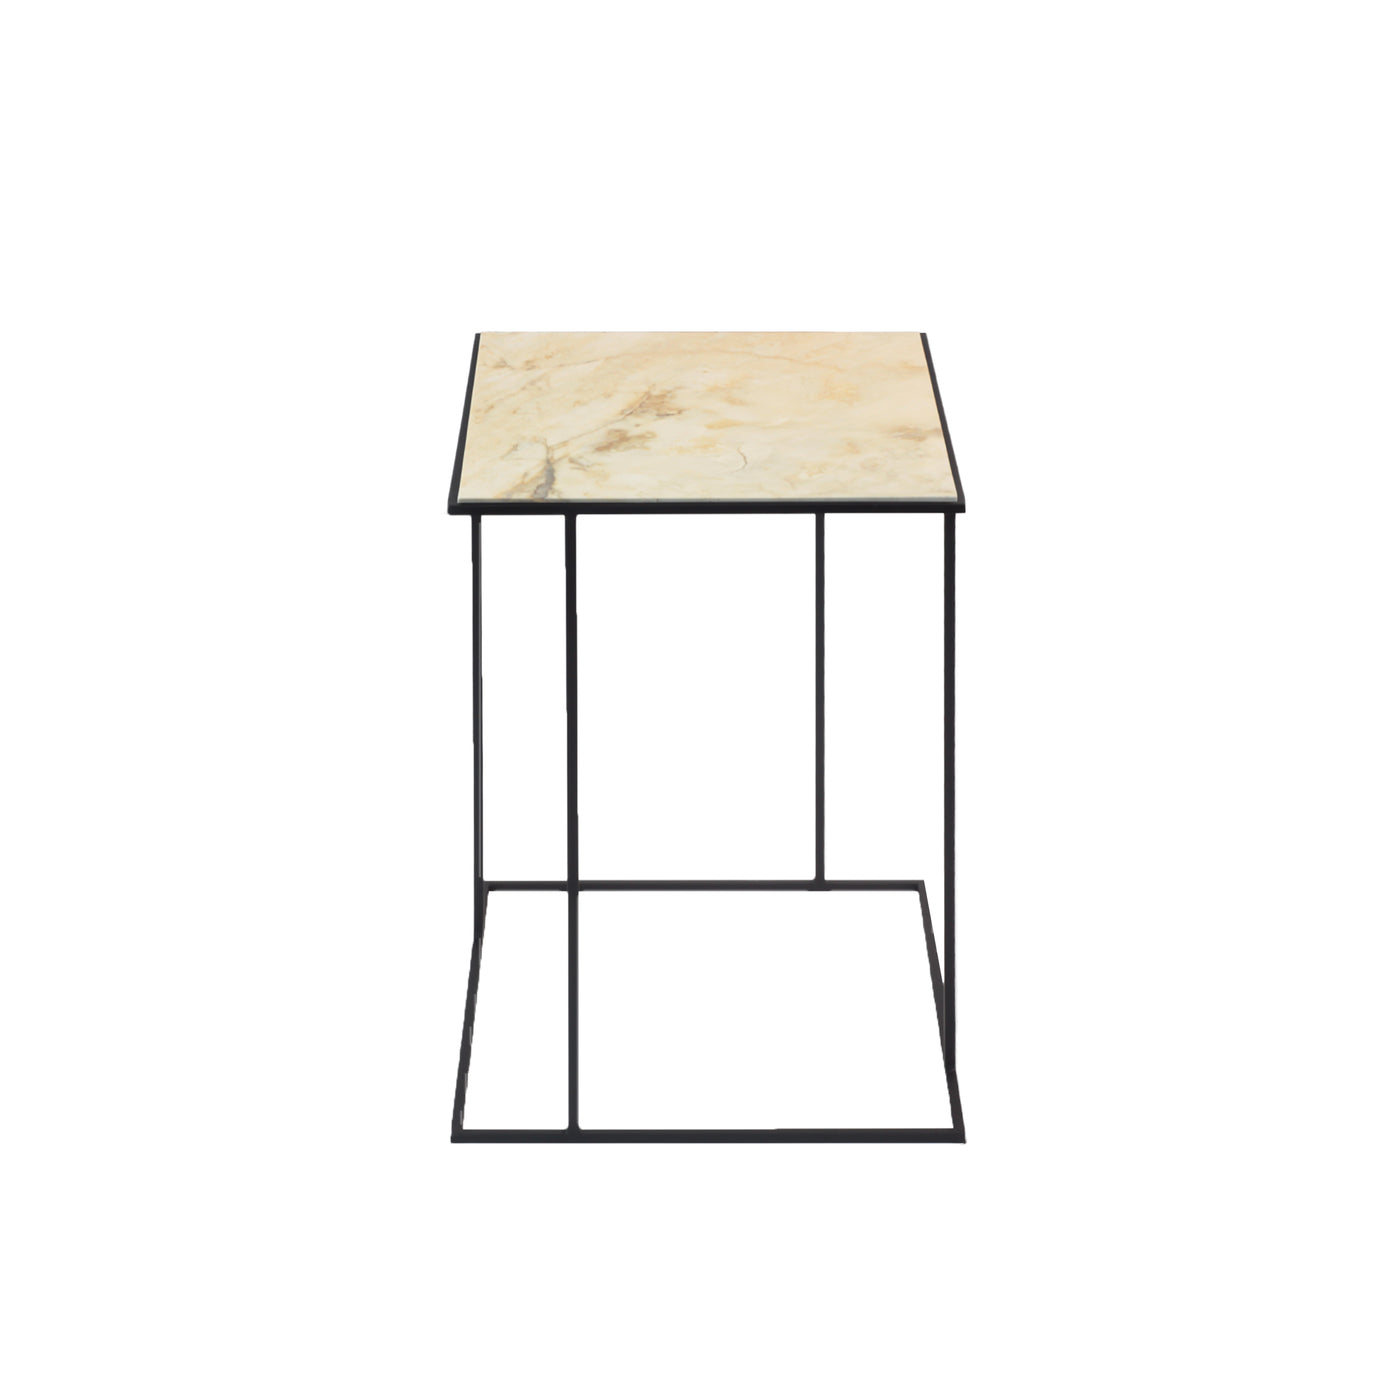 Stone Side Table FRAME by Nicola Di Froscia for DFdesignLab 03